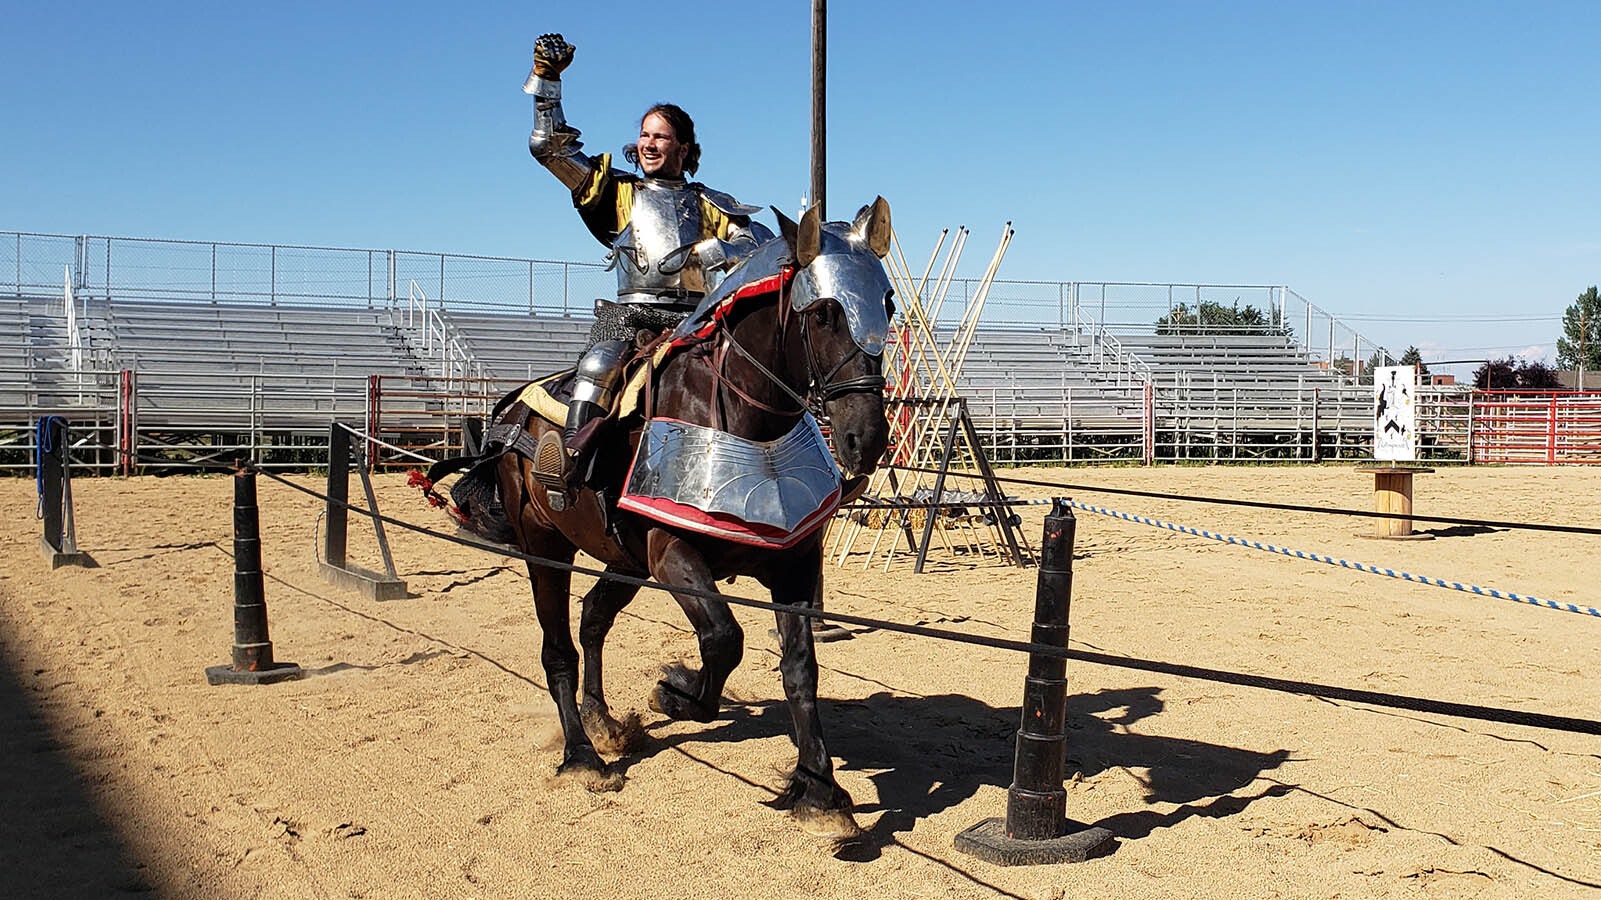 Andrew Hoffman raises his arm to the crowd prior to a jousting match during the recent Tournament of Knights in Sheridan.